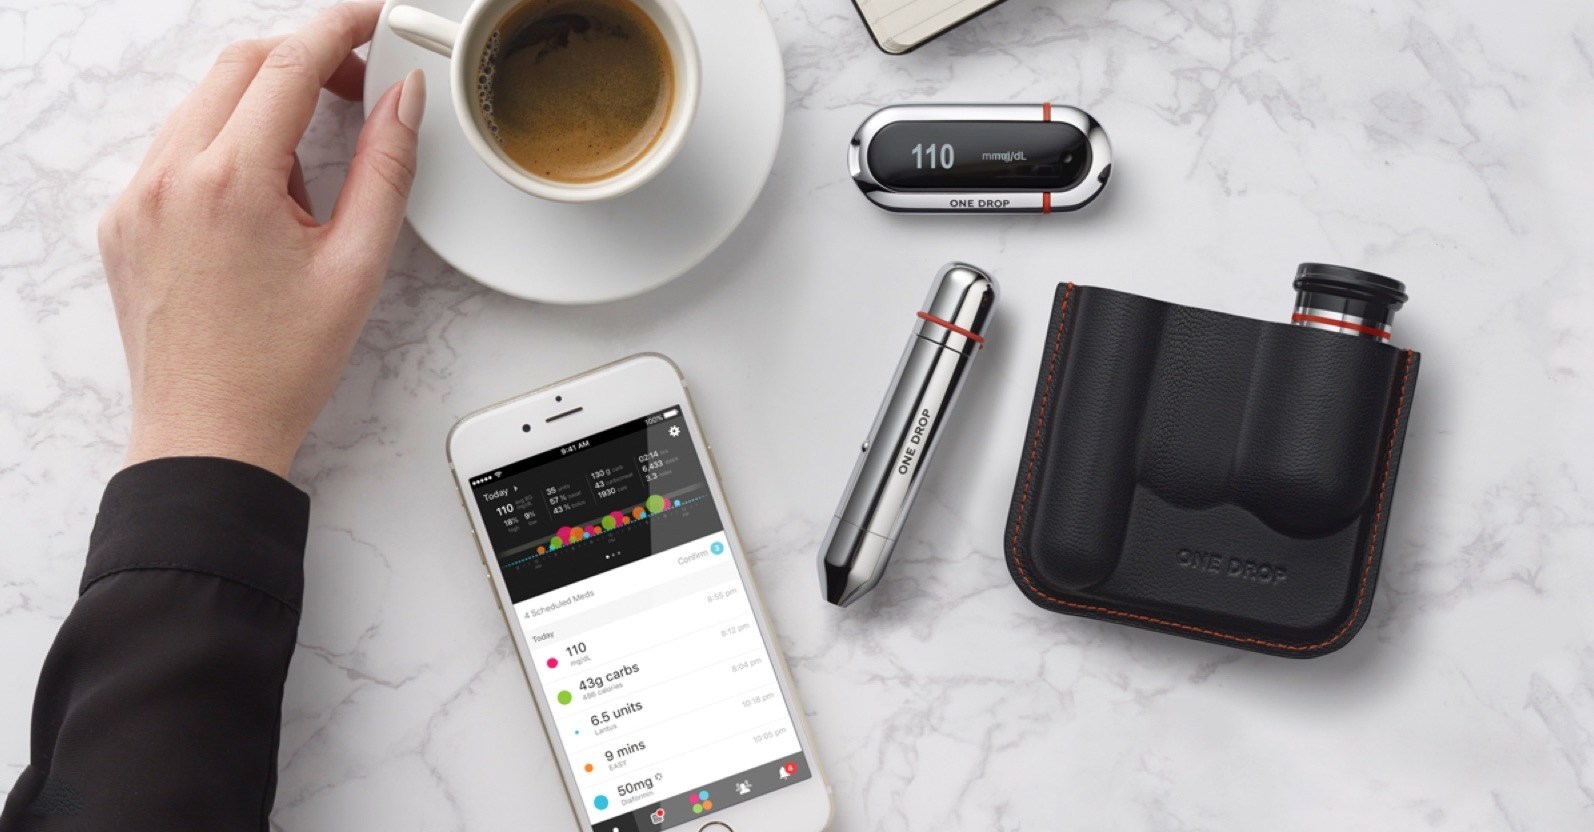 Birds eye view of One Drop app lancet blood sugar meter with a cup of coffee